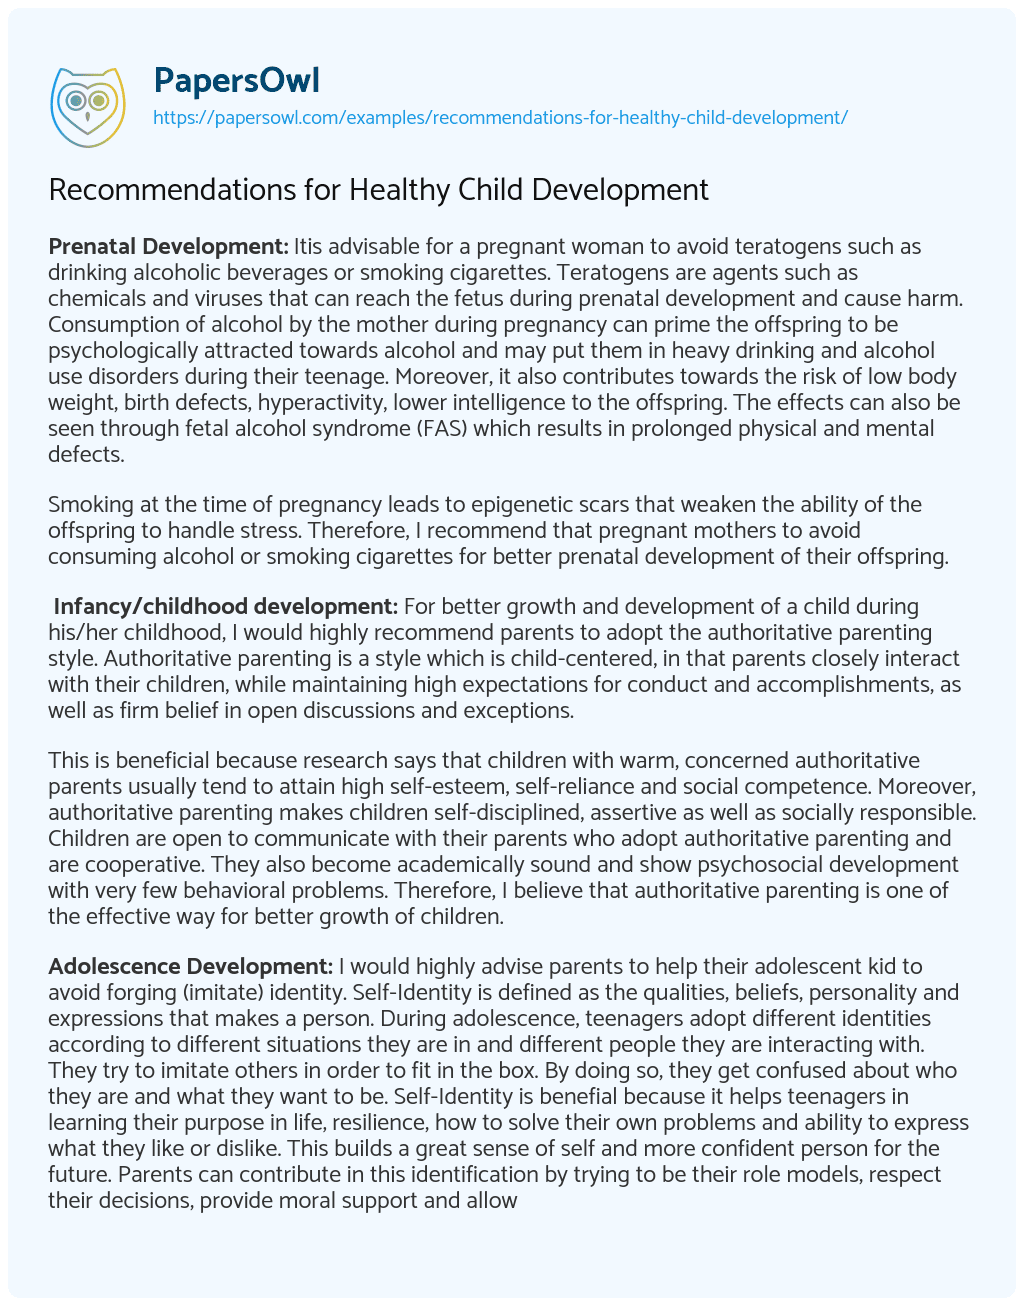 Essay on Recommendations for Healthy Child Development